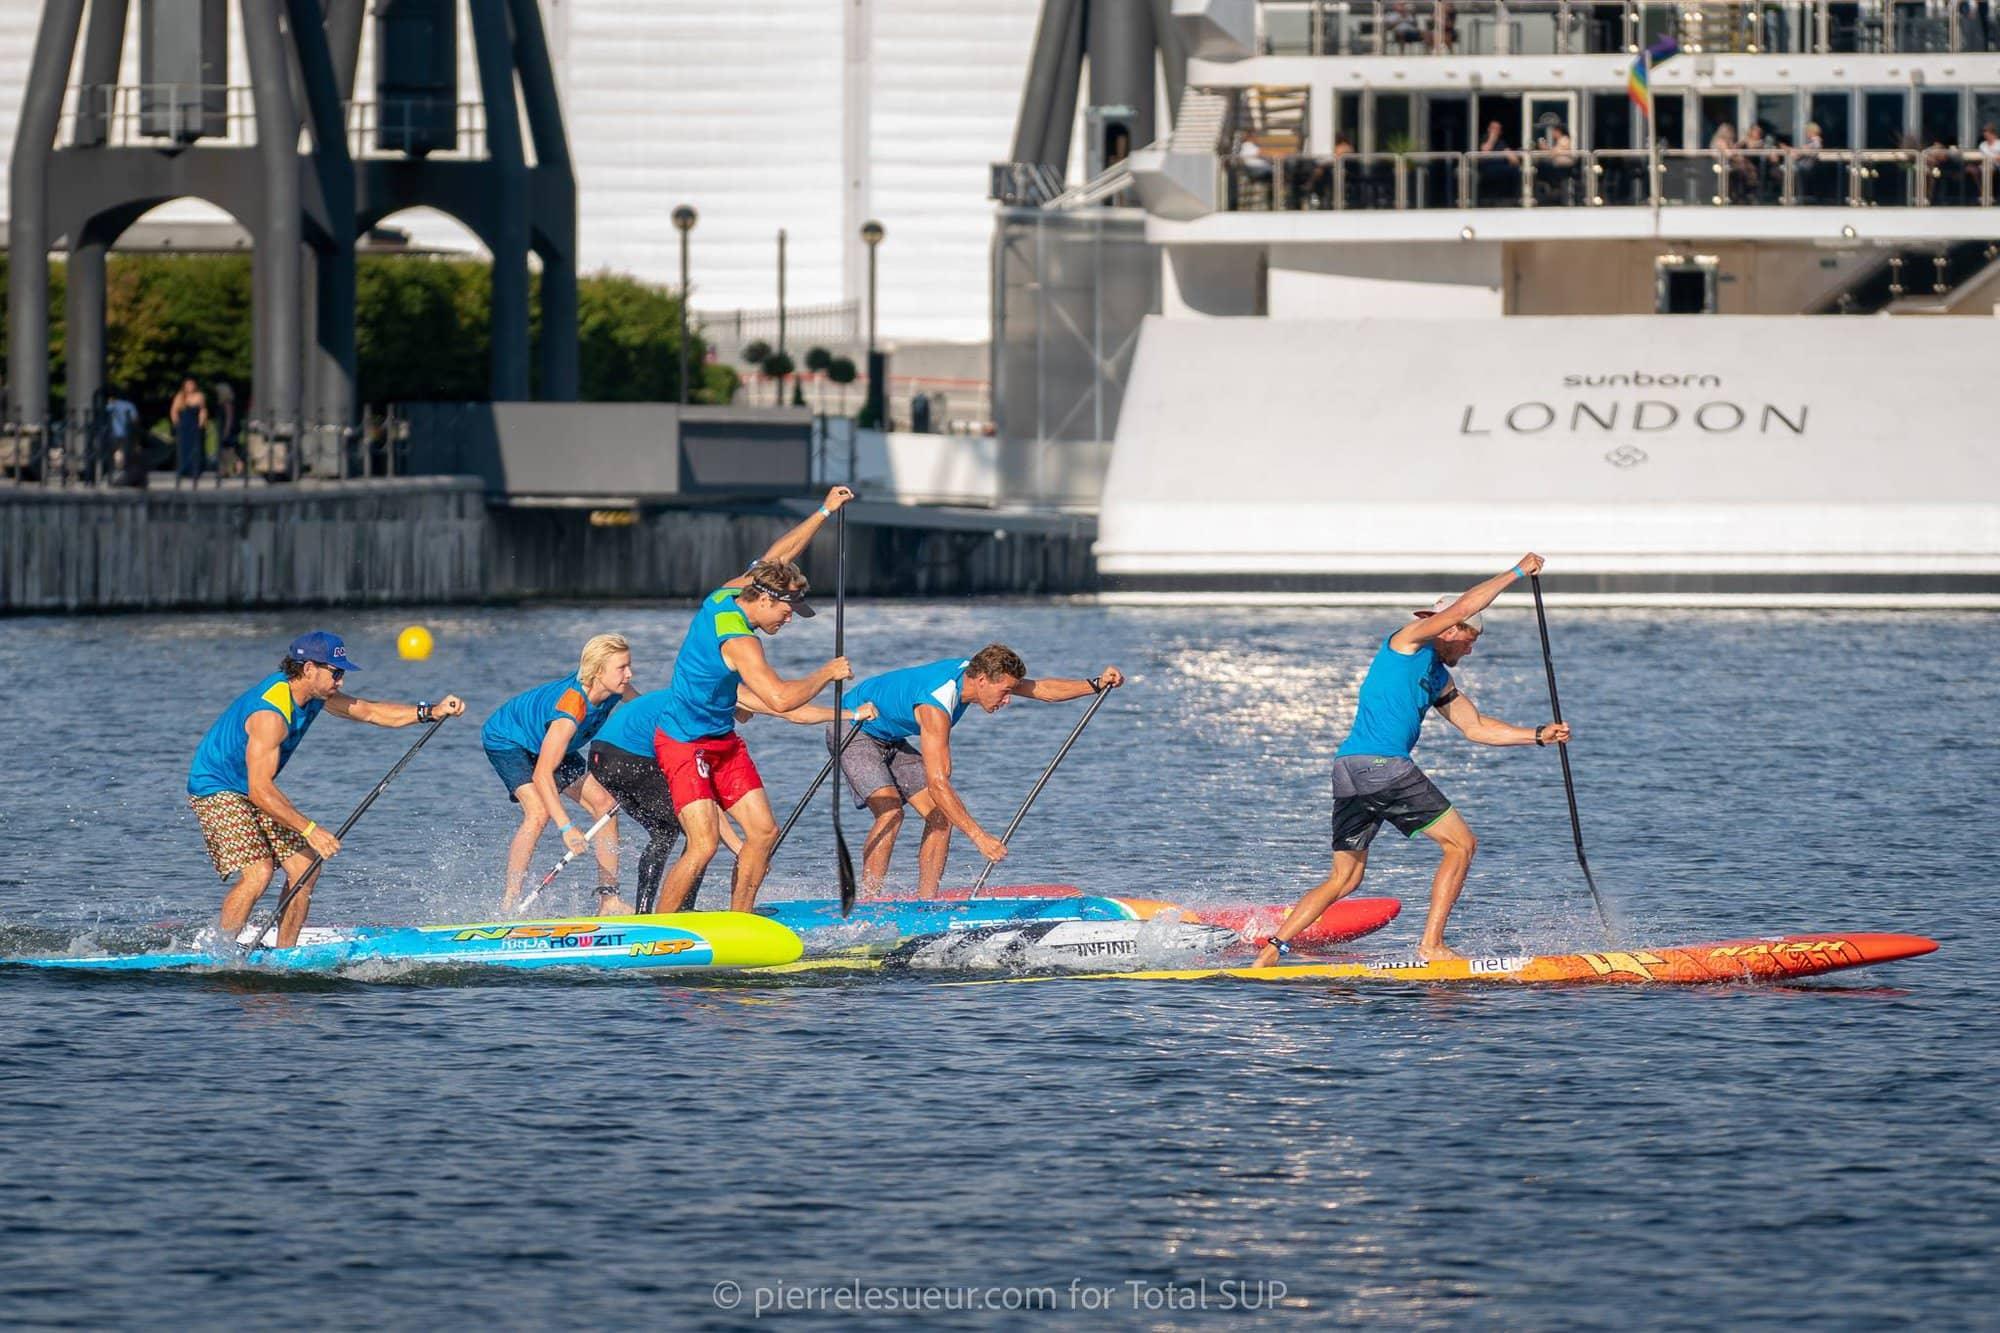 Steinfath, Notar and Reickert Earn Podiums at the London SUP Open to Start the 2018 APP World Tour - Naish.com